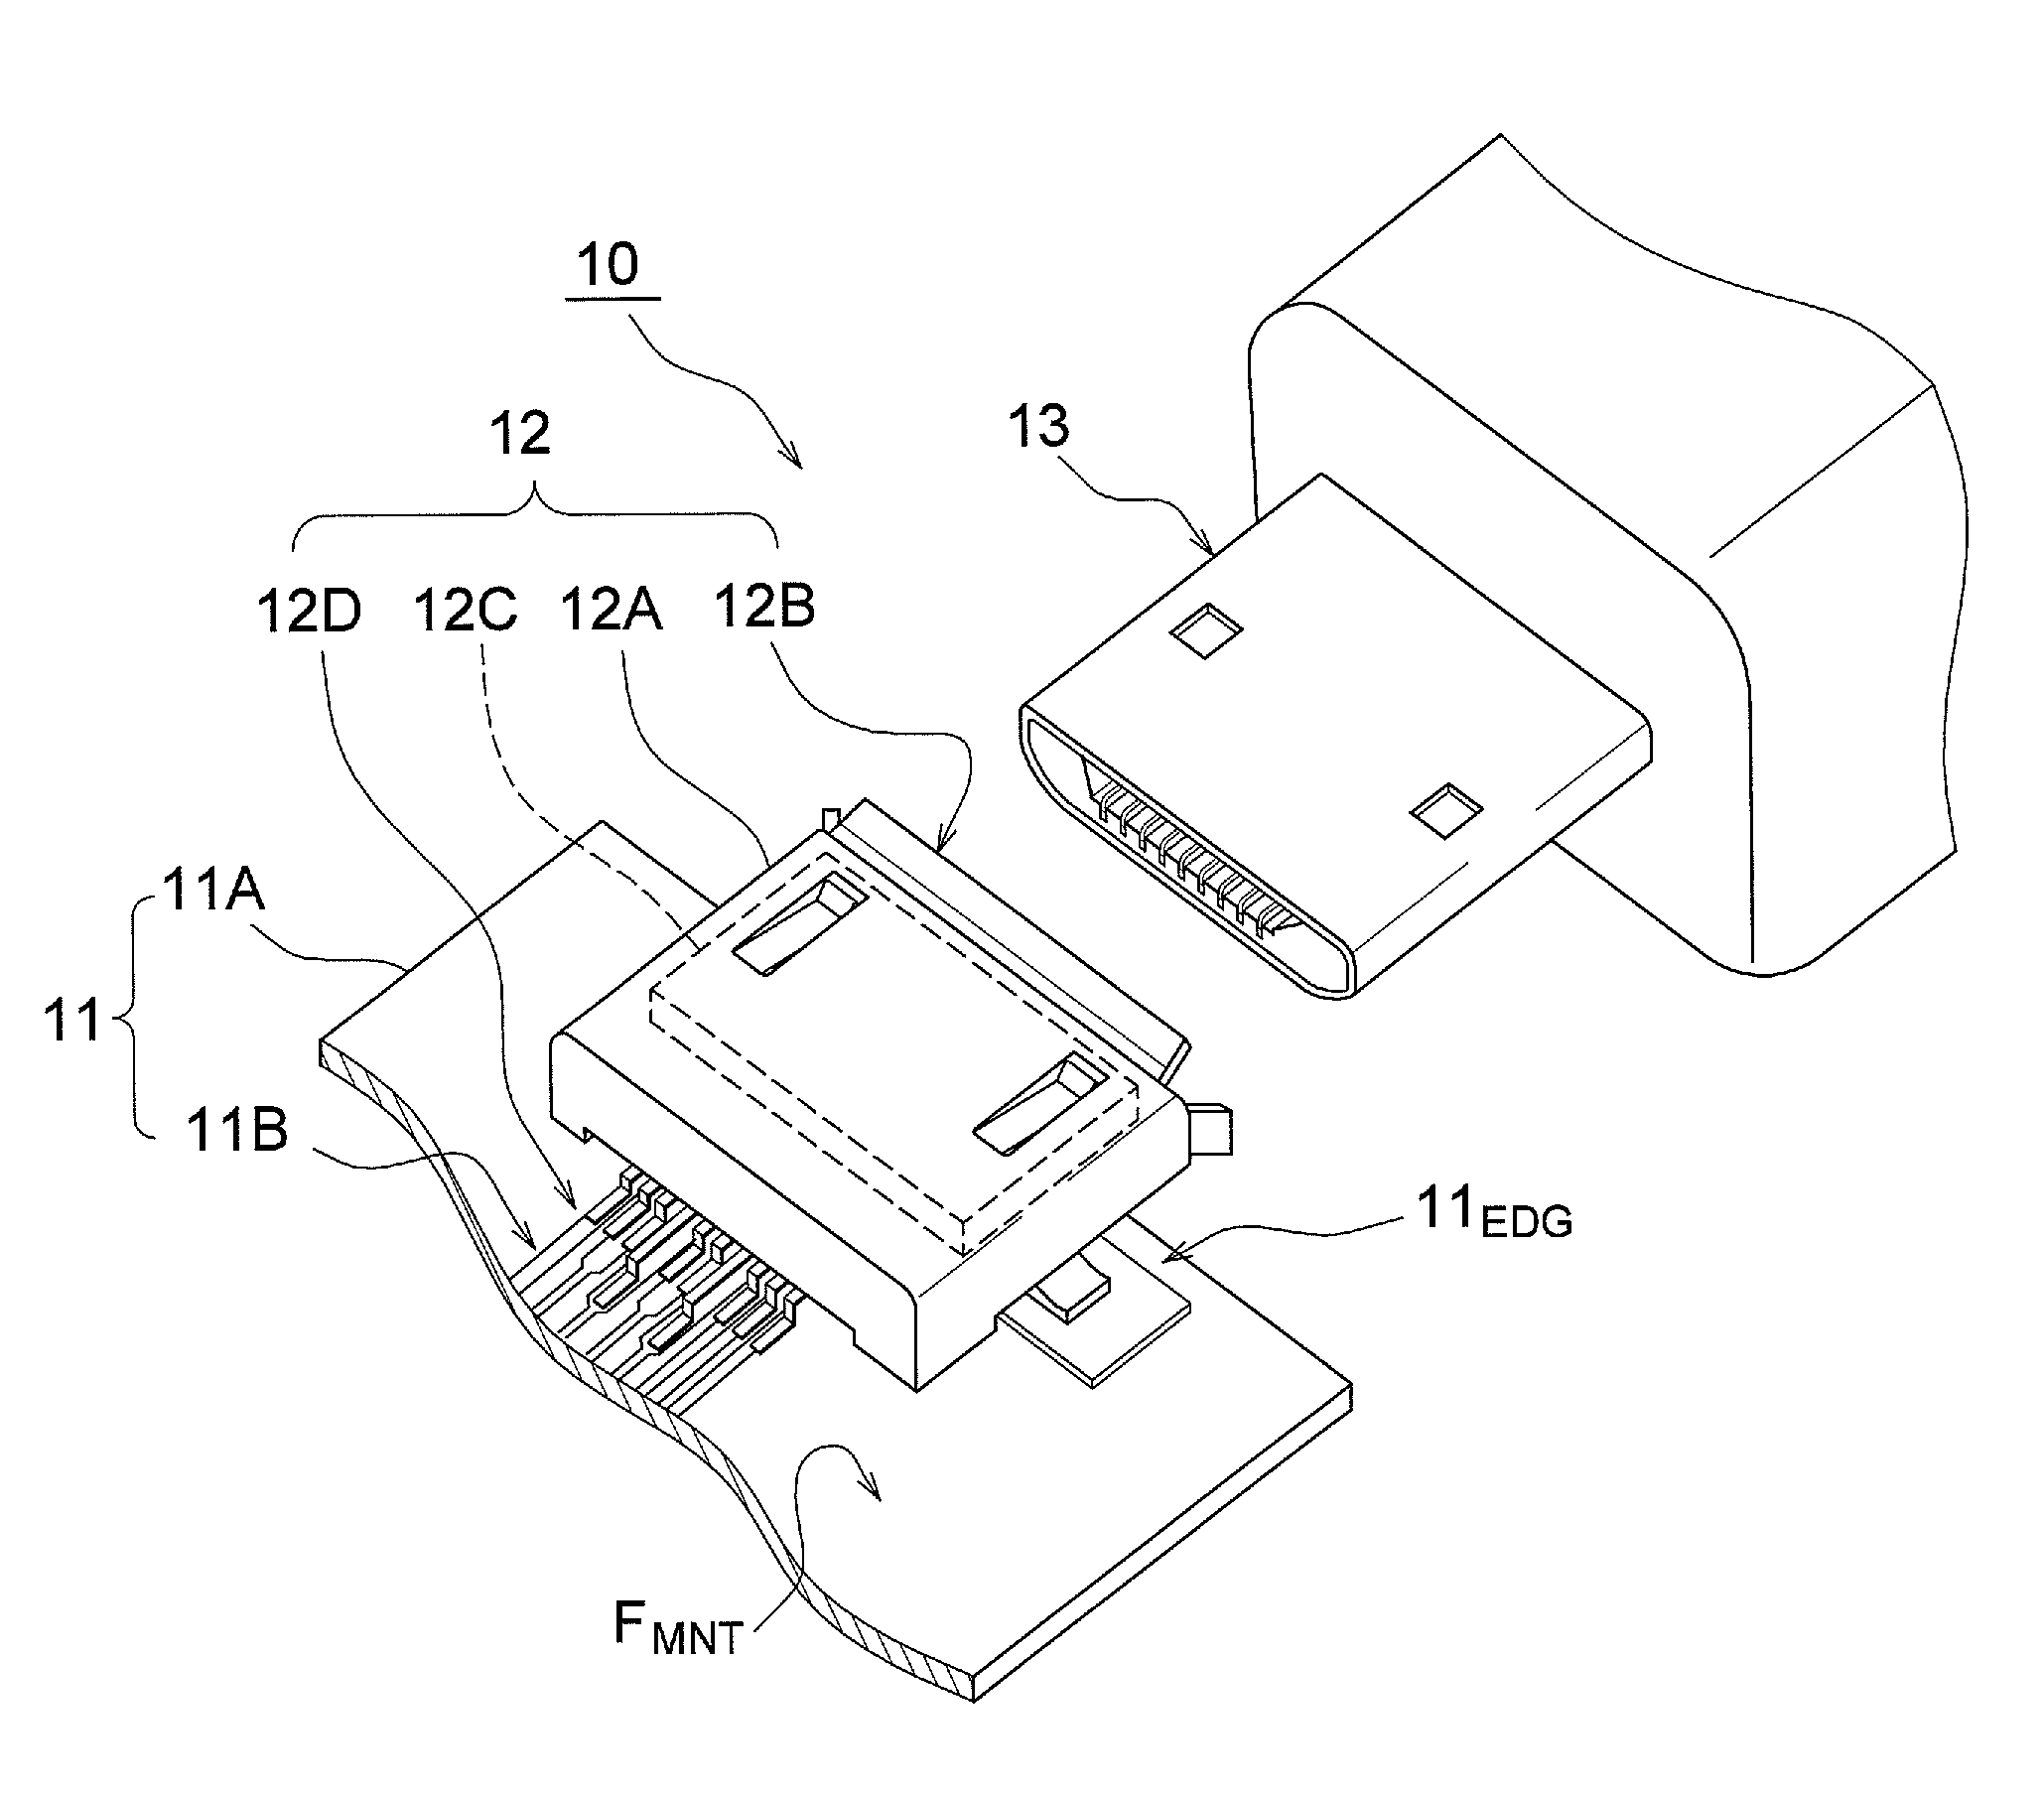 Receptacle, printed wiring board, and electronic device